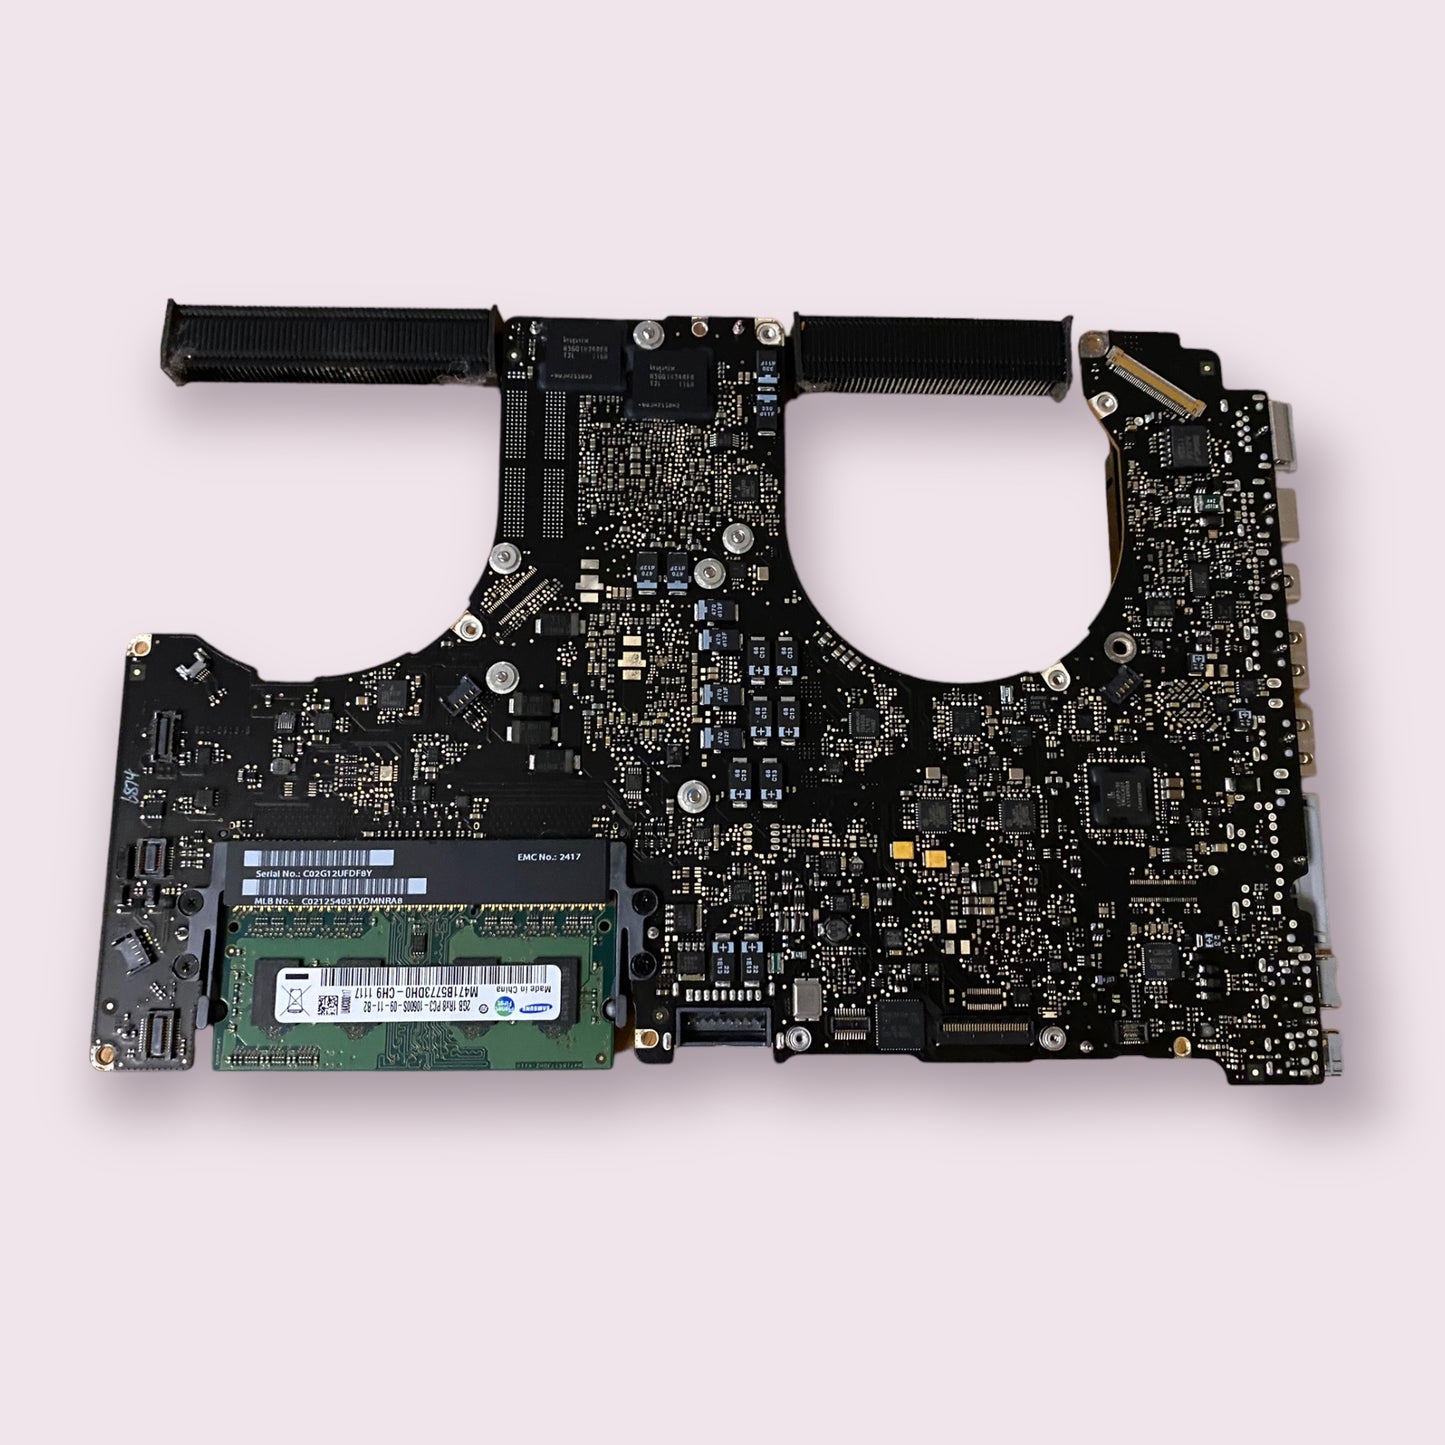 Macbook Pro 15" Early 2011 A1286 Motherboard 820-2915-A i7 Processor @2.0GHz - Genuine Pull Part